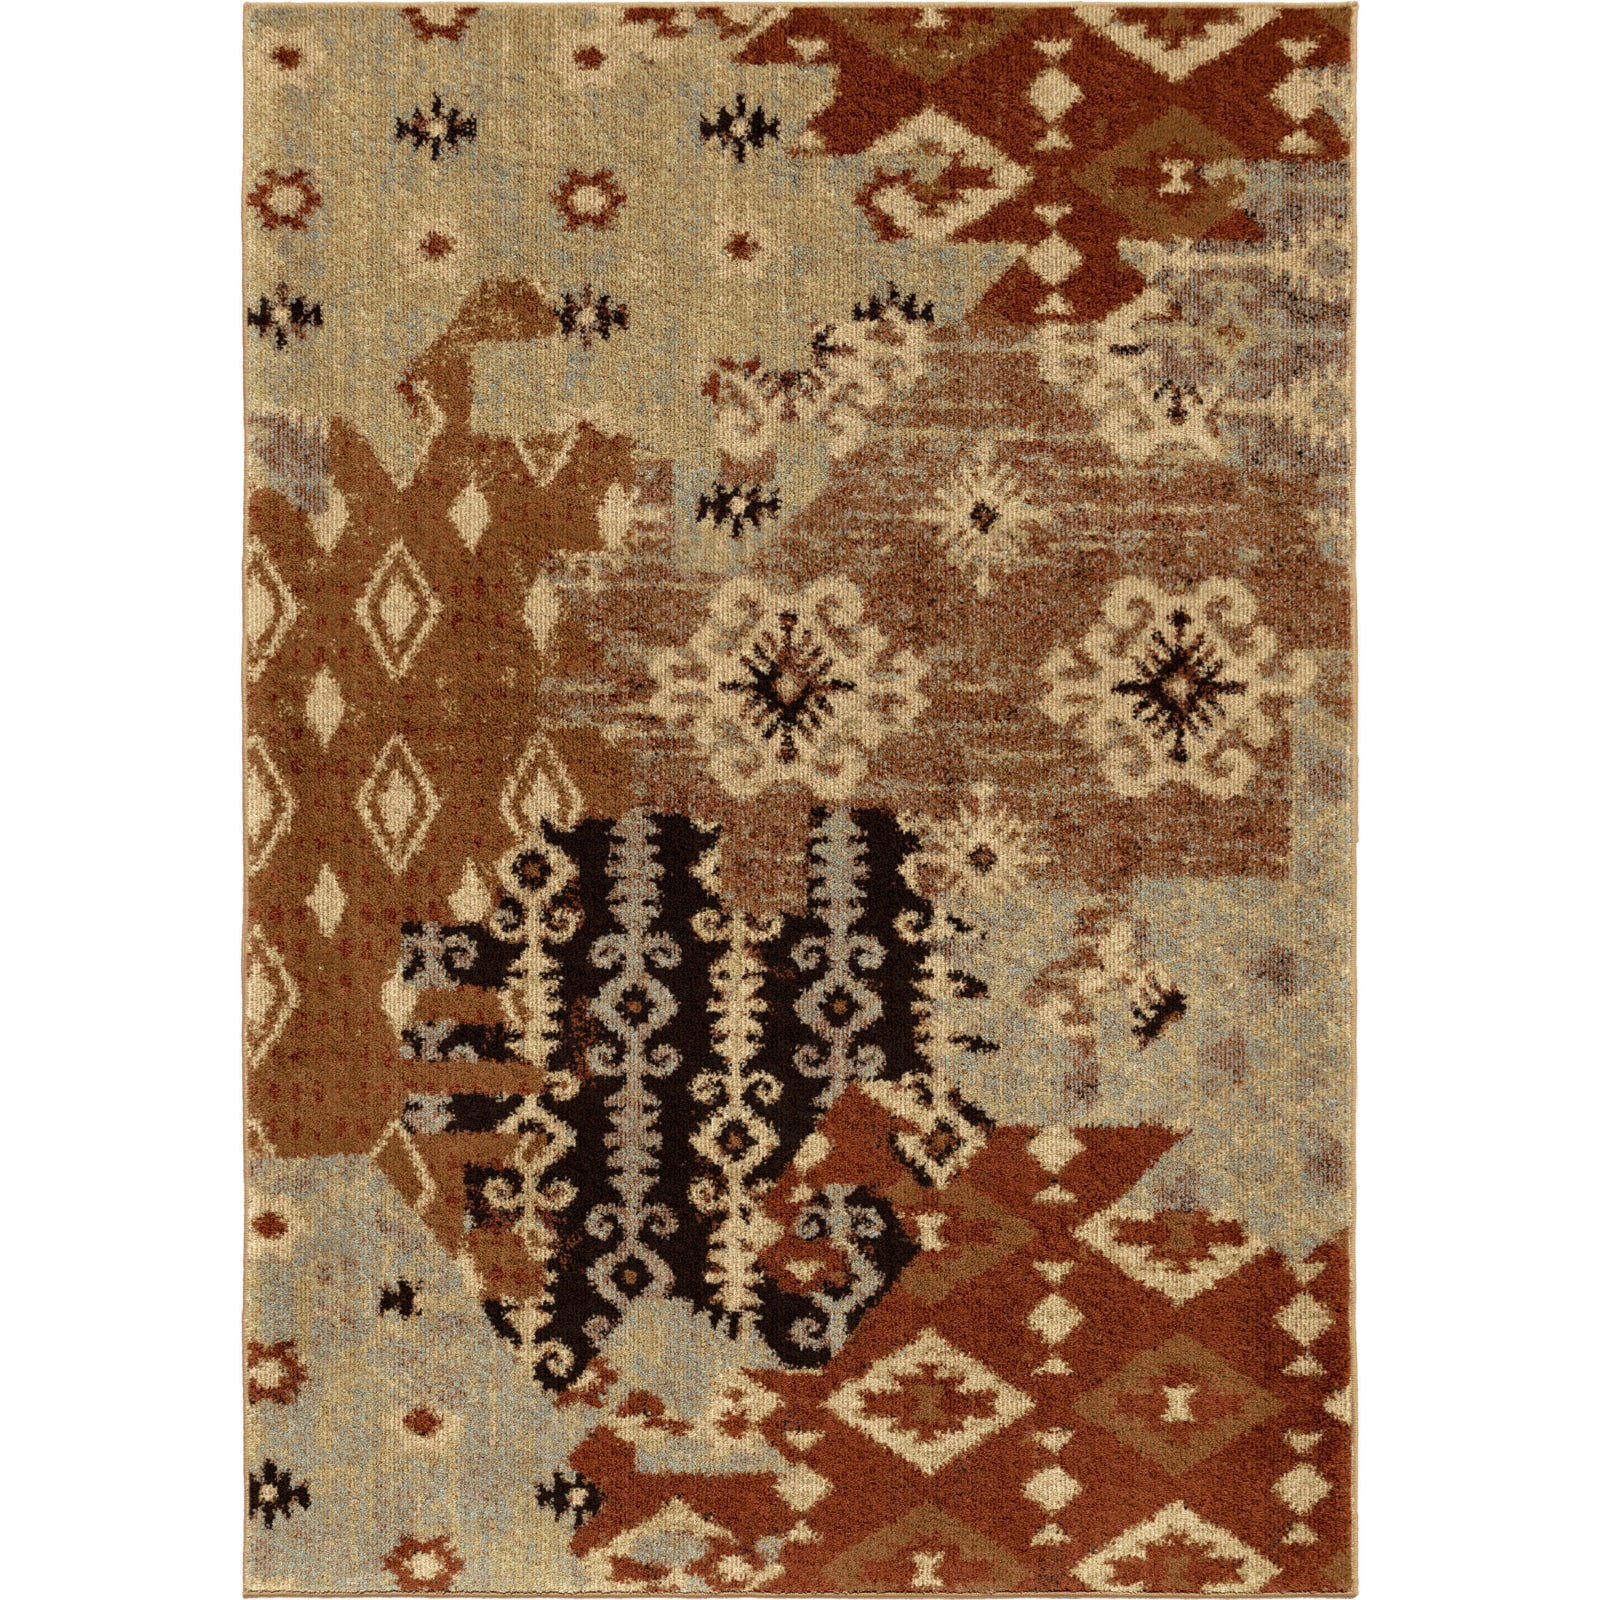 Orian Rugs American Classics Southwest Patches Multi Area Rug main image